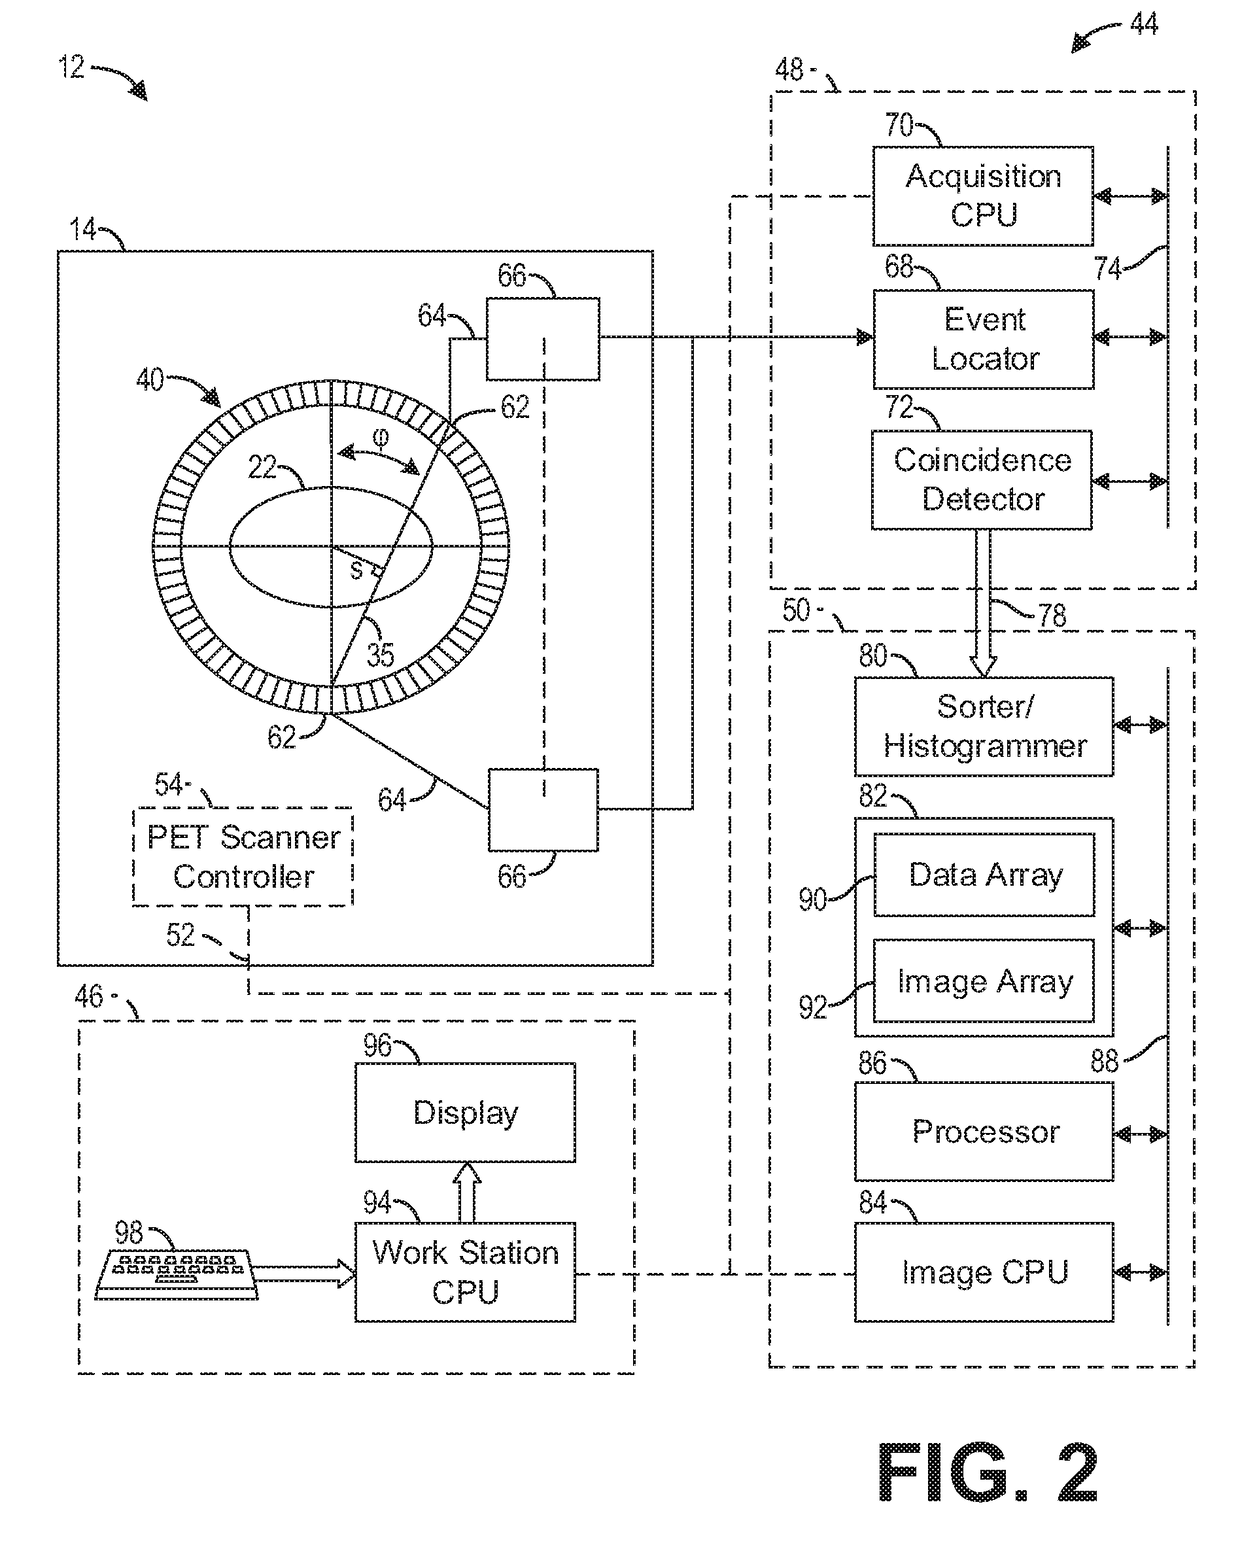 Systems and methods for multi-modality imaging component alignment